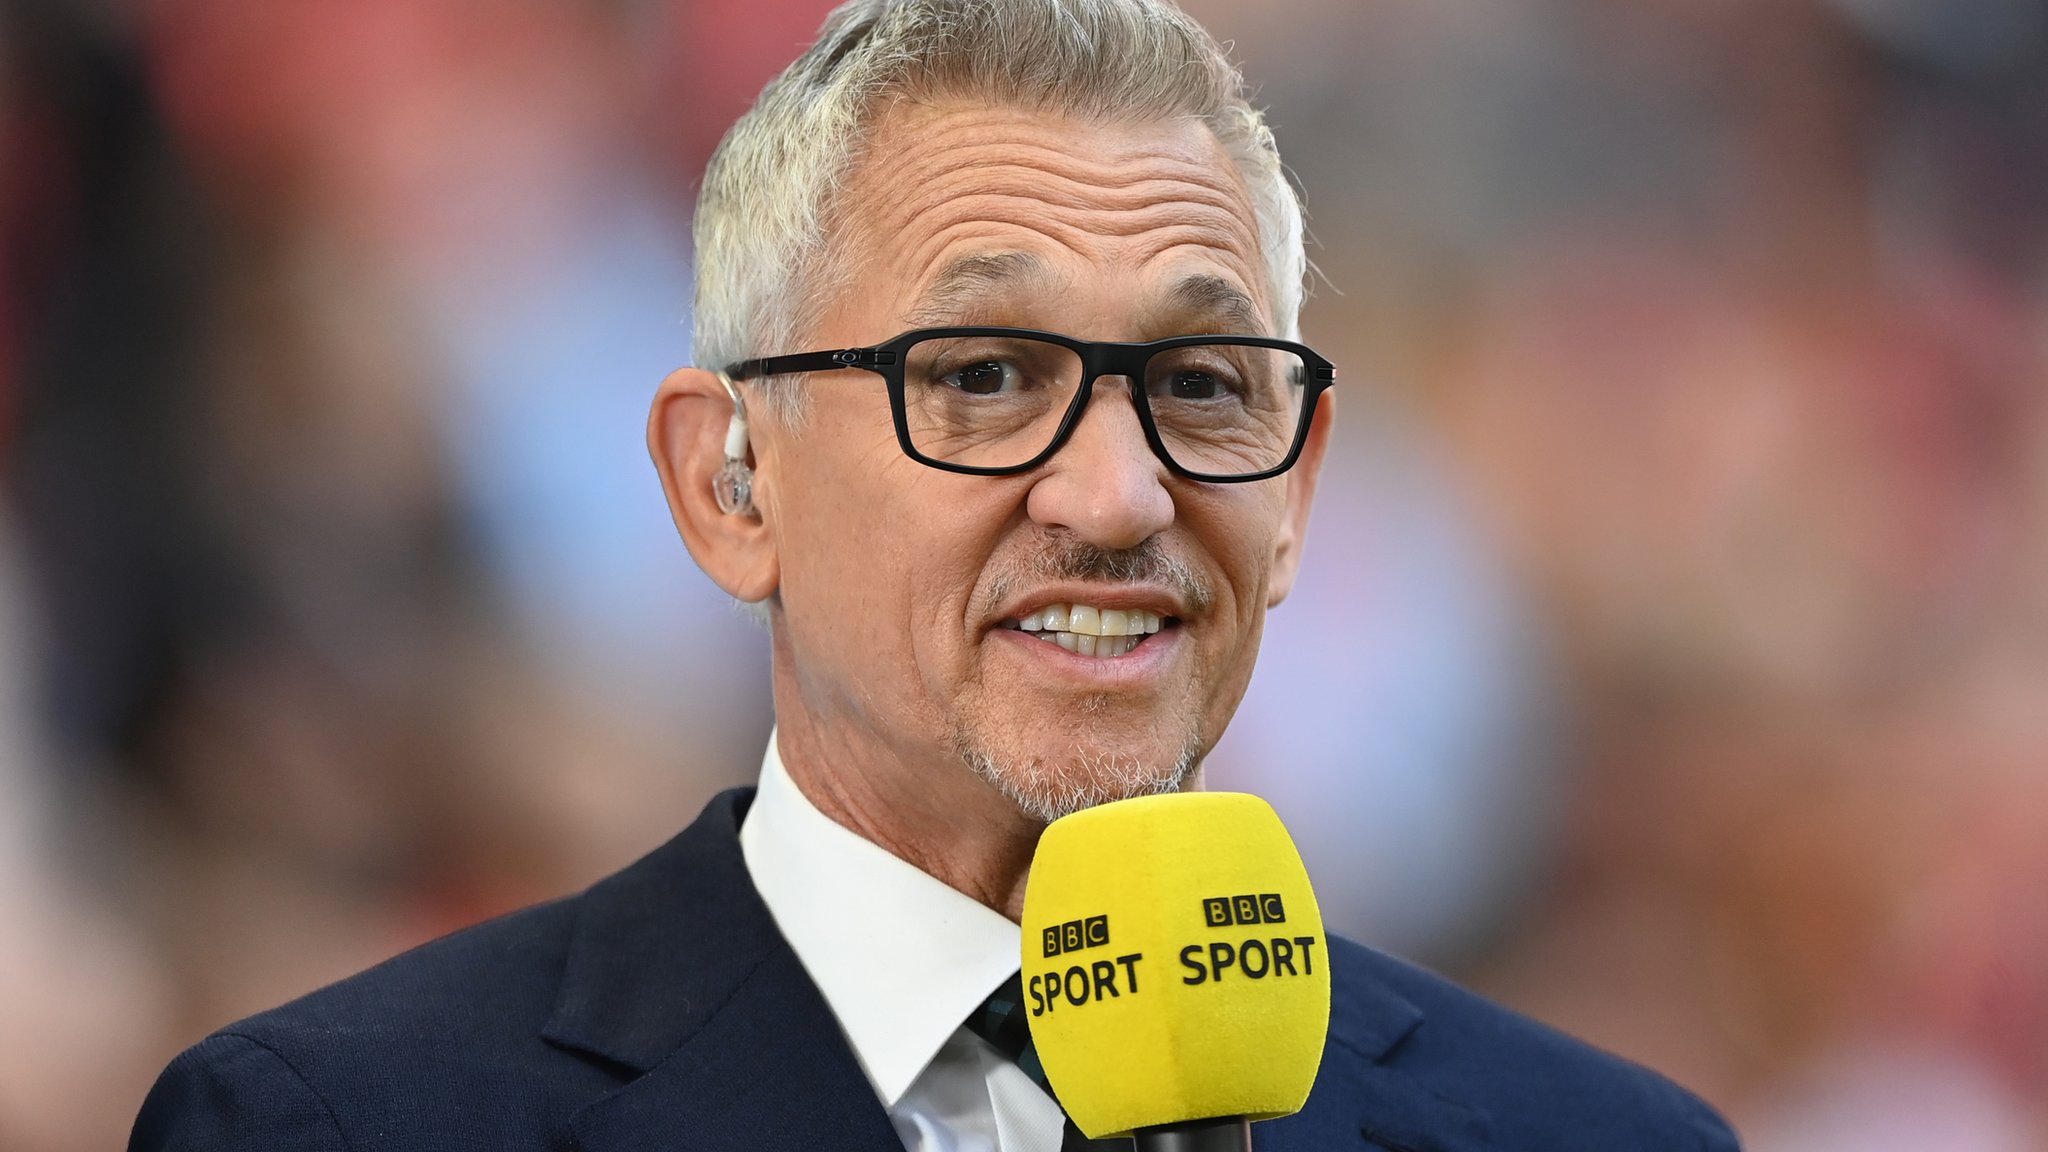 BBC: New rules for flagship presenters after Lineker row